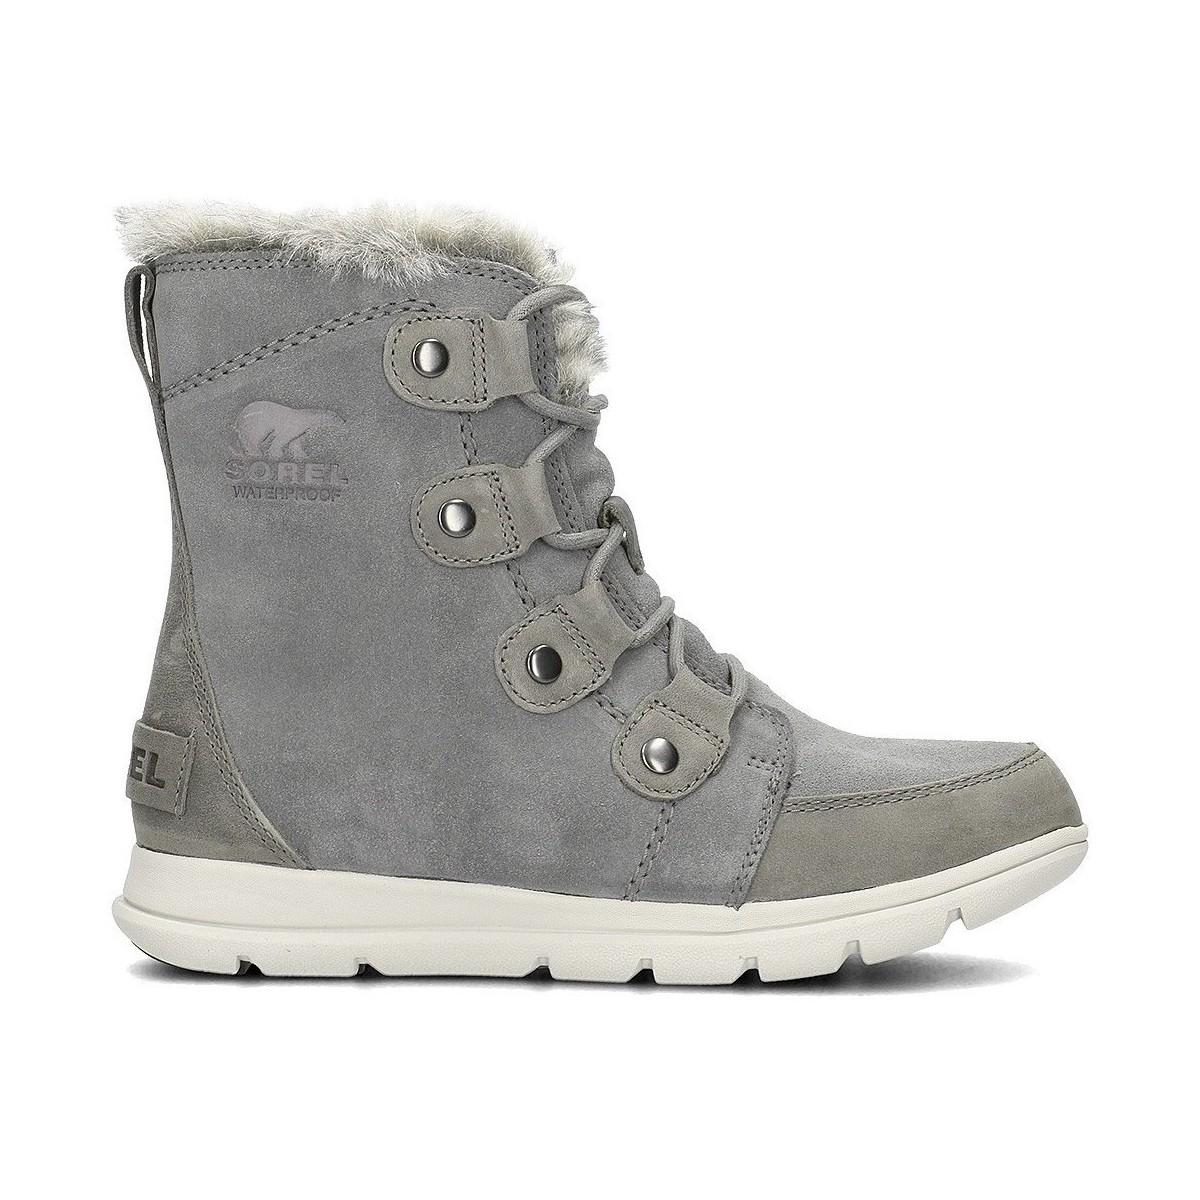 Under Armour Boots Womens Snow Boot - almoire